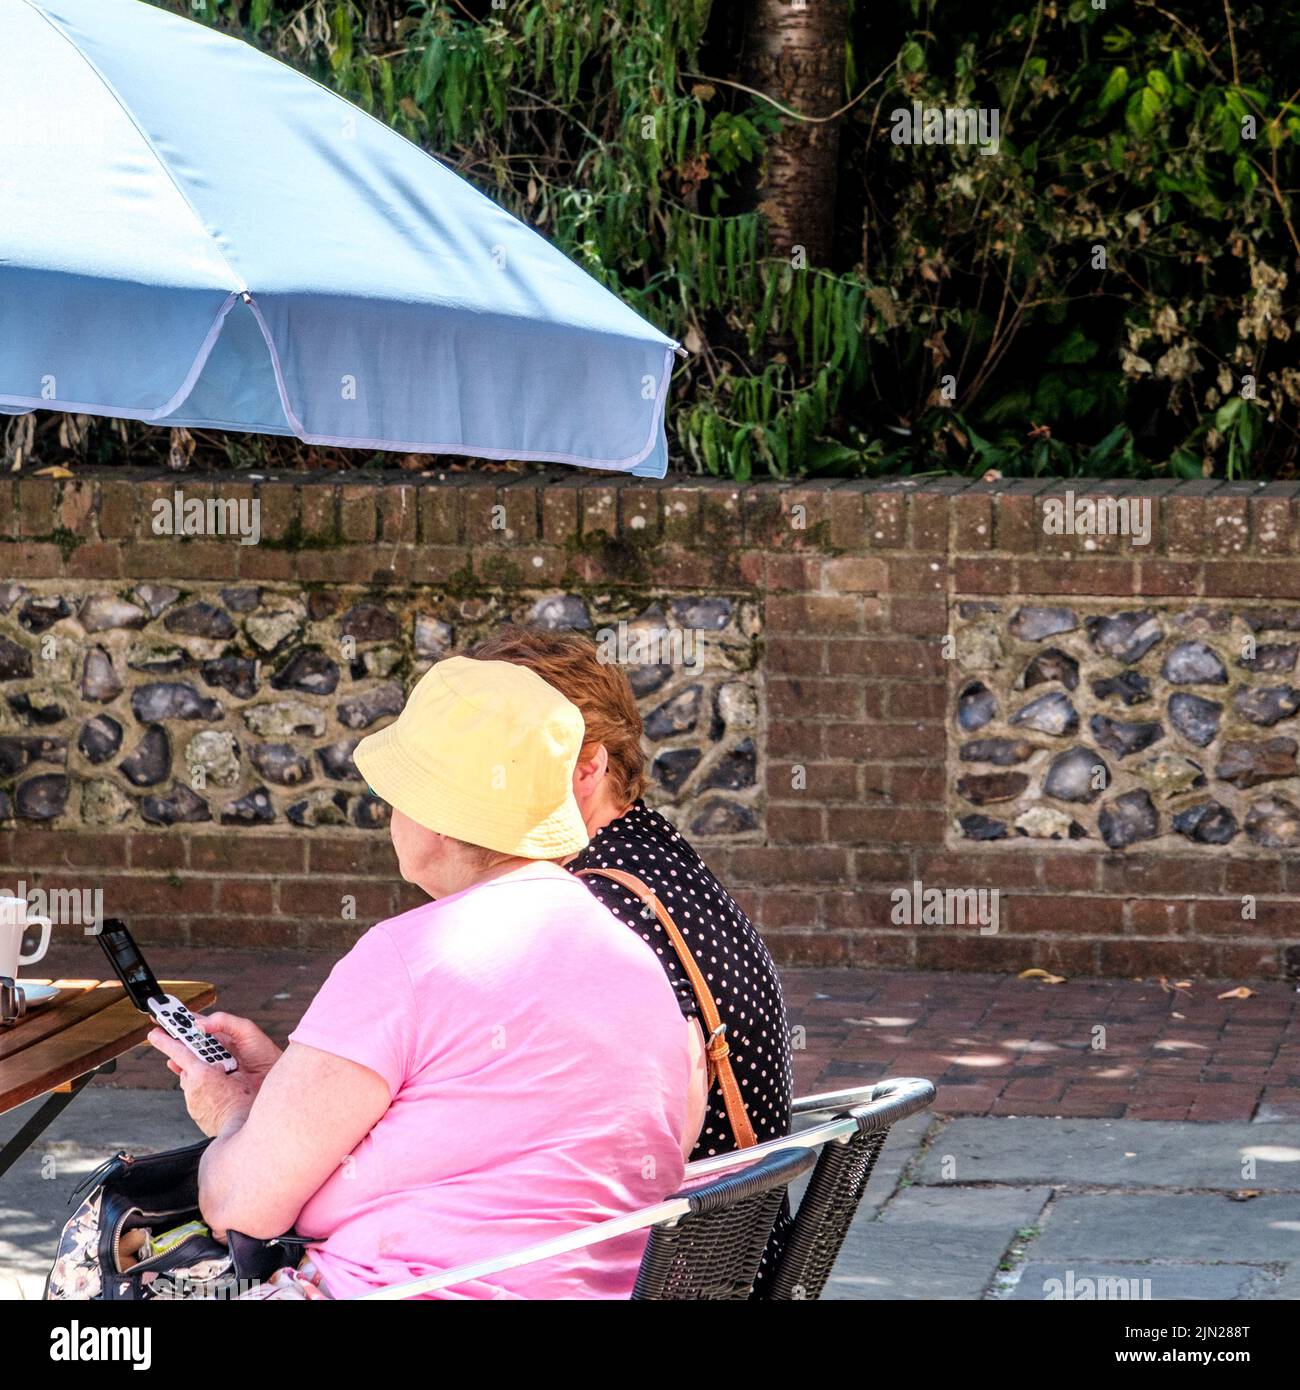 Dorking, Surrey Hills, London UK, July 07 2022, Older Woman Sitting With A Friend Using Mobile Phone Under Sun Shade Unbrella Stock Photo